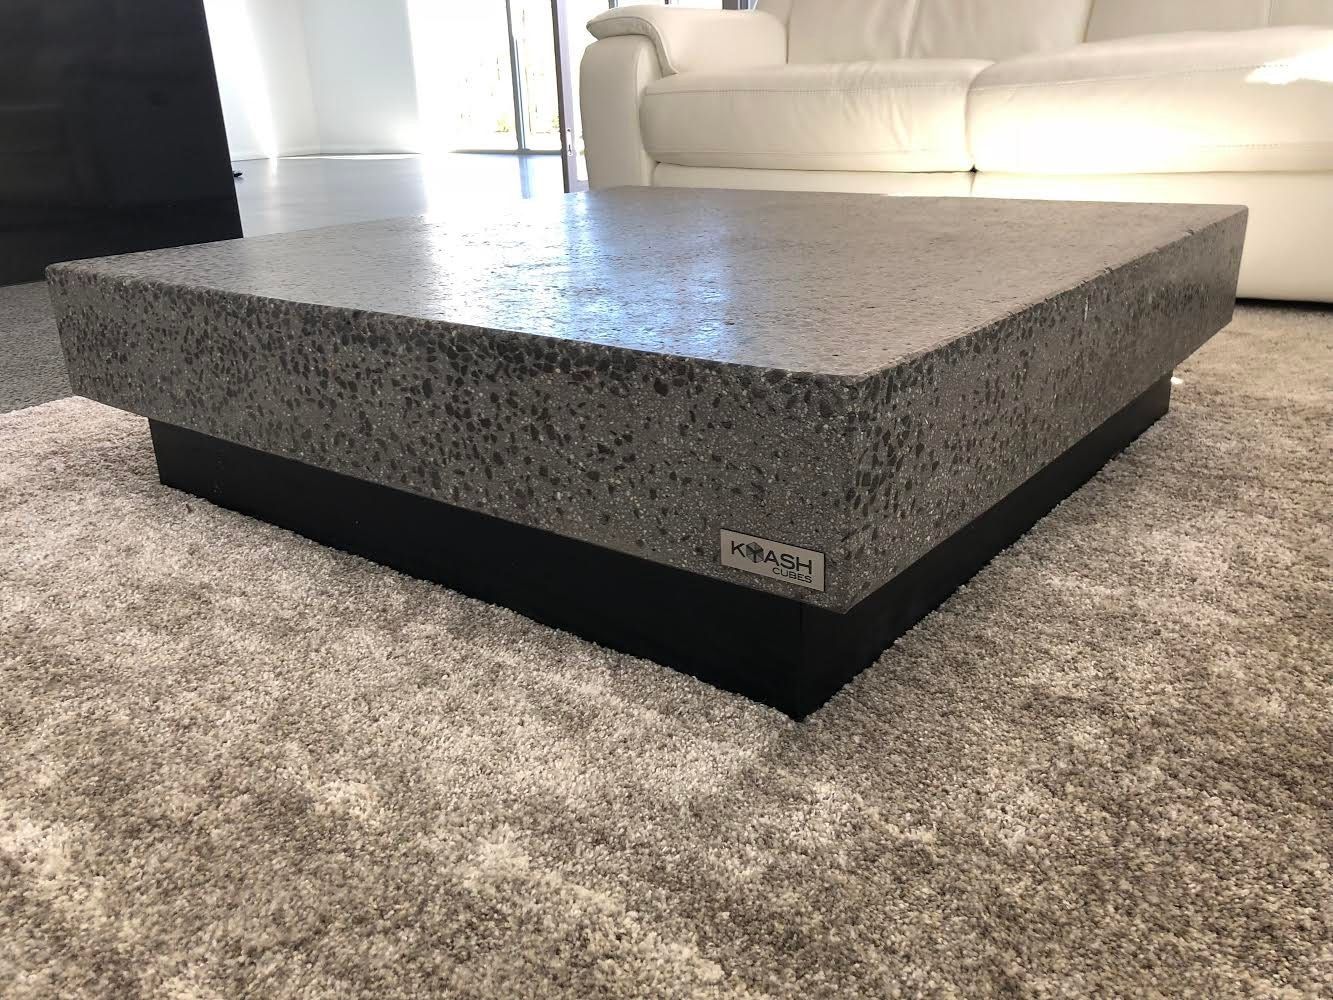 Concrete Coffee Table Exposed Aggregate 1 X 1m Modern Bespoke – Etsy Within Modern Concrete Coffee Tables (View 19 of 20)